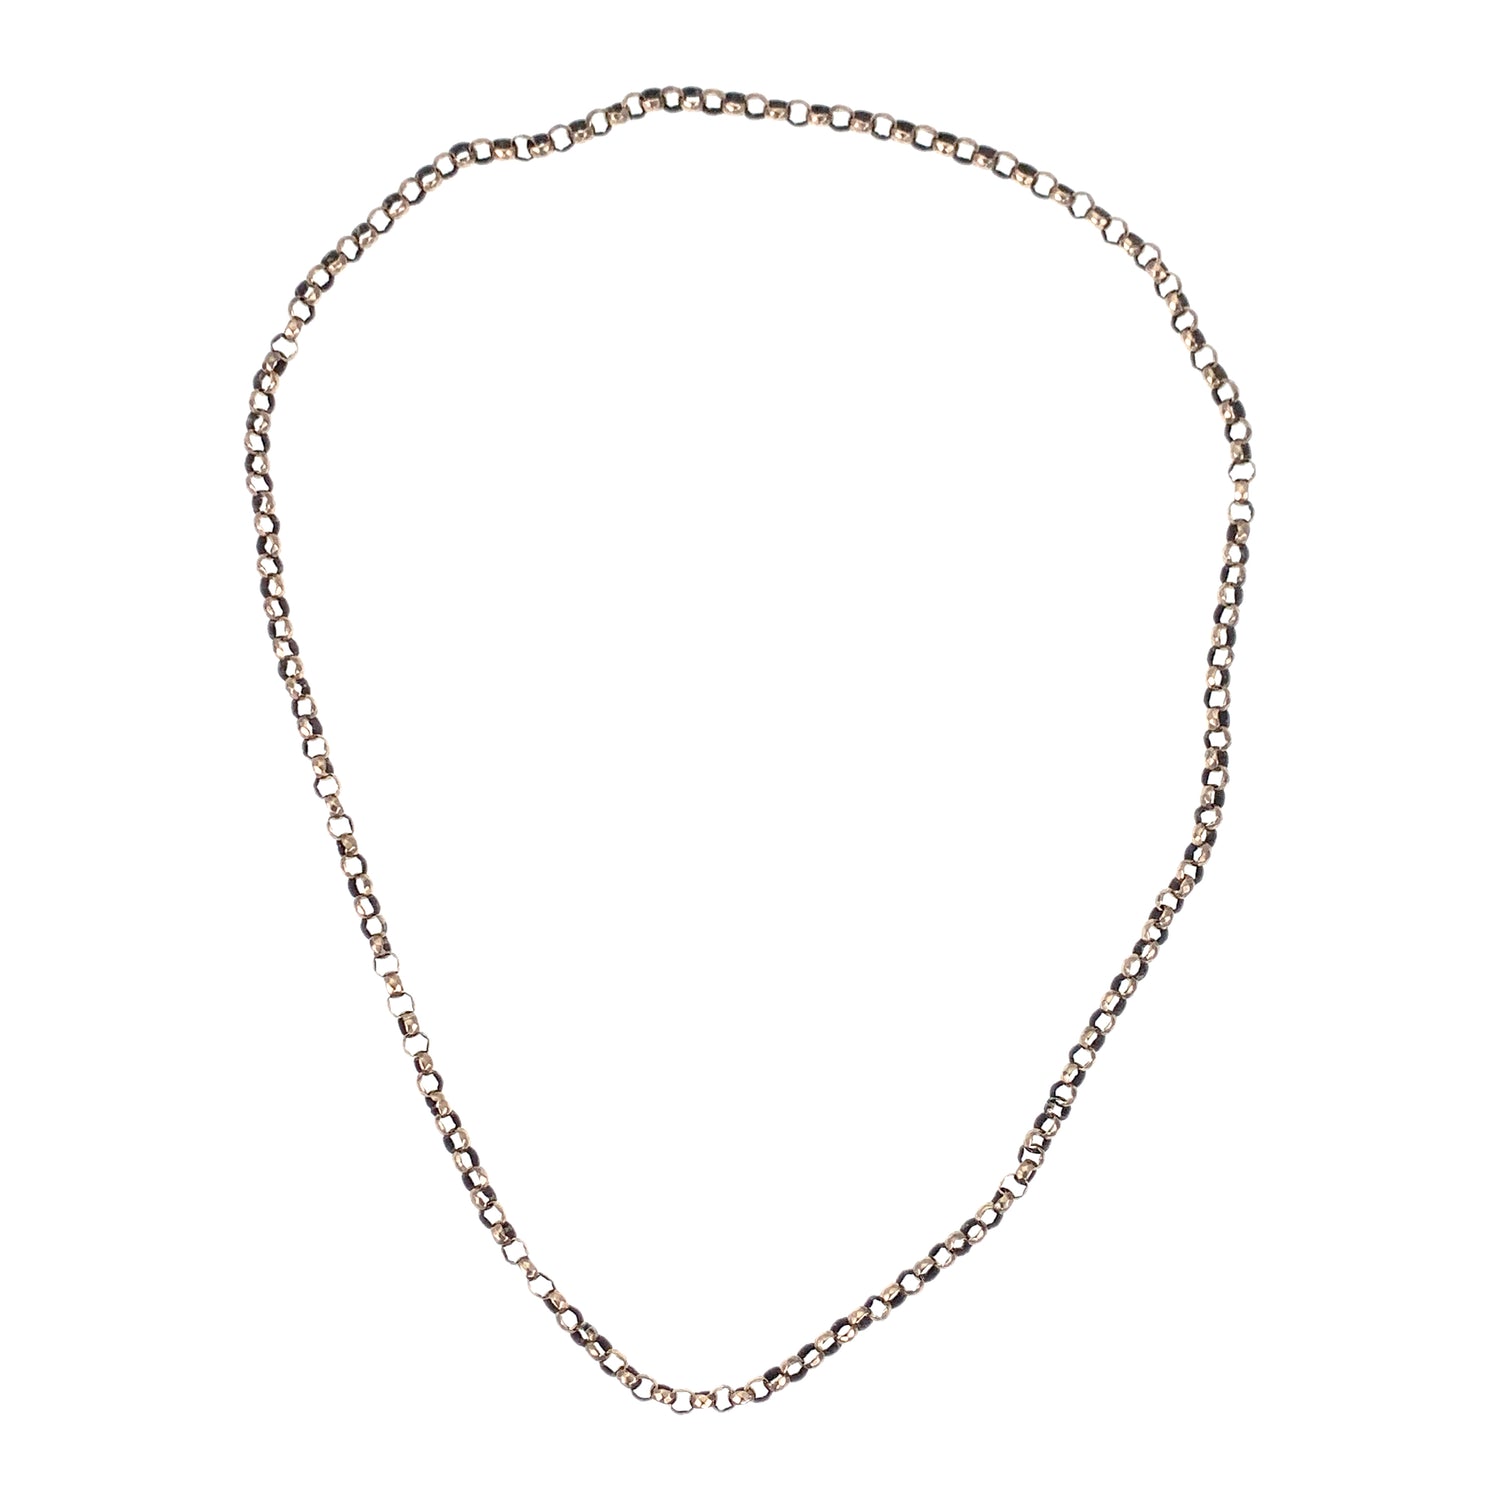 Sold at Auction: A 9ct GOLD BELCHER CHAIN NECKLACE. Weight 7.1g. Length  50cm.